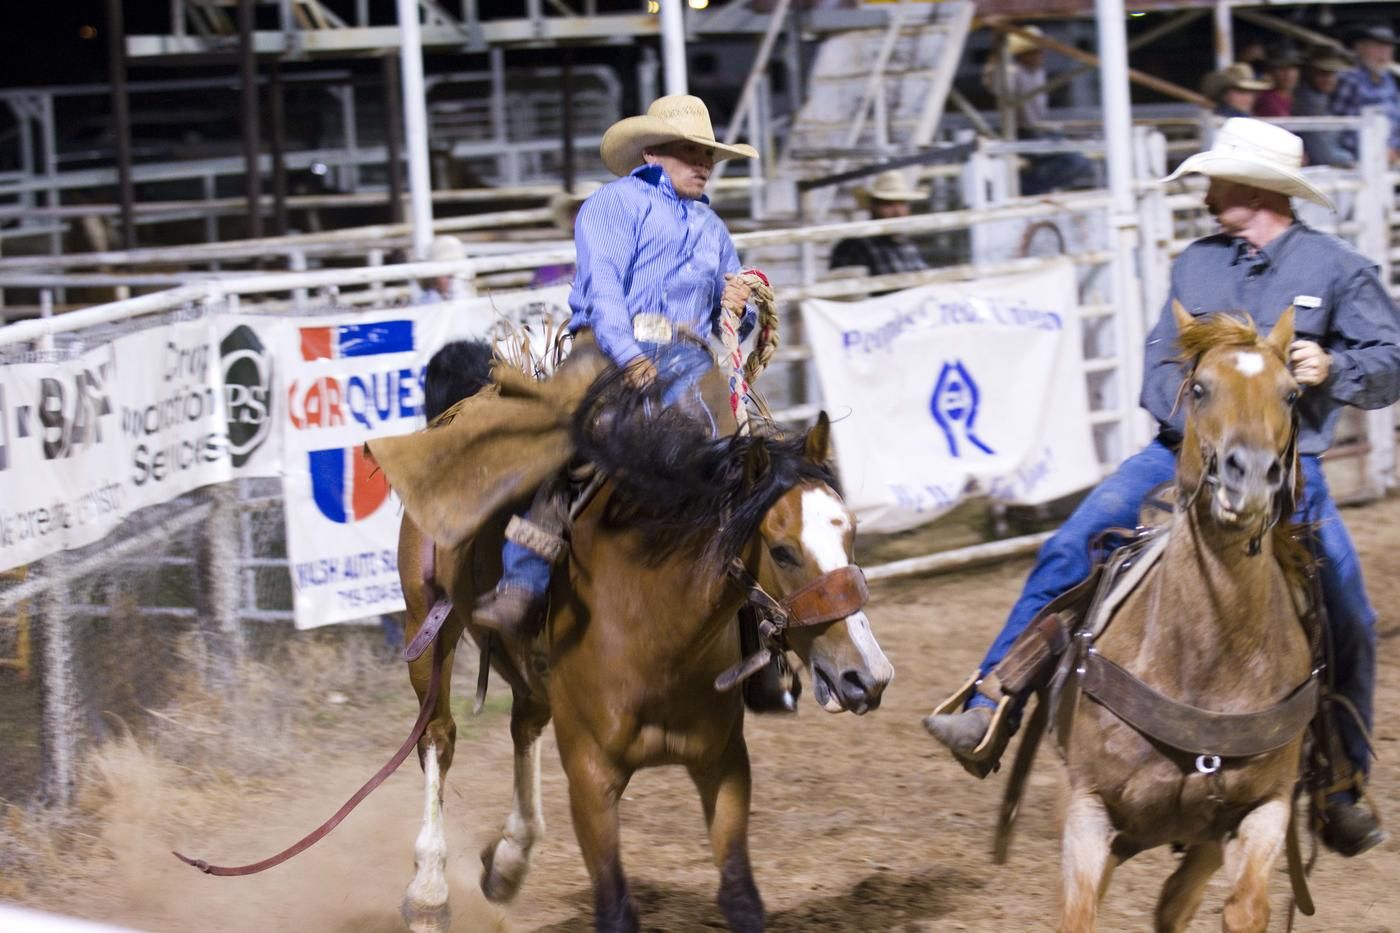 pro rodeo cowboy on horse near other cowboy